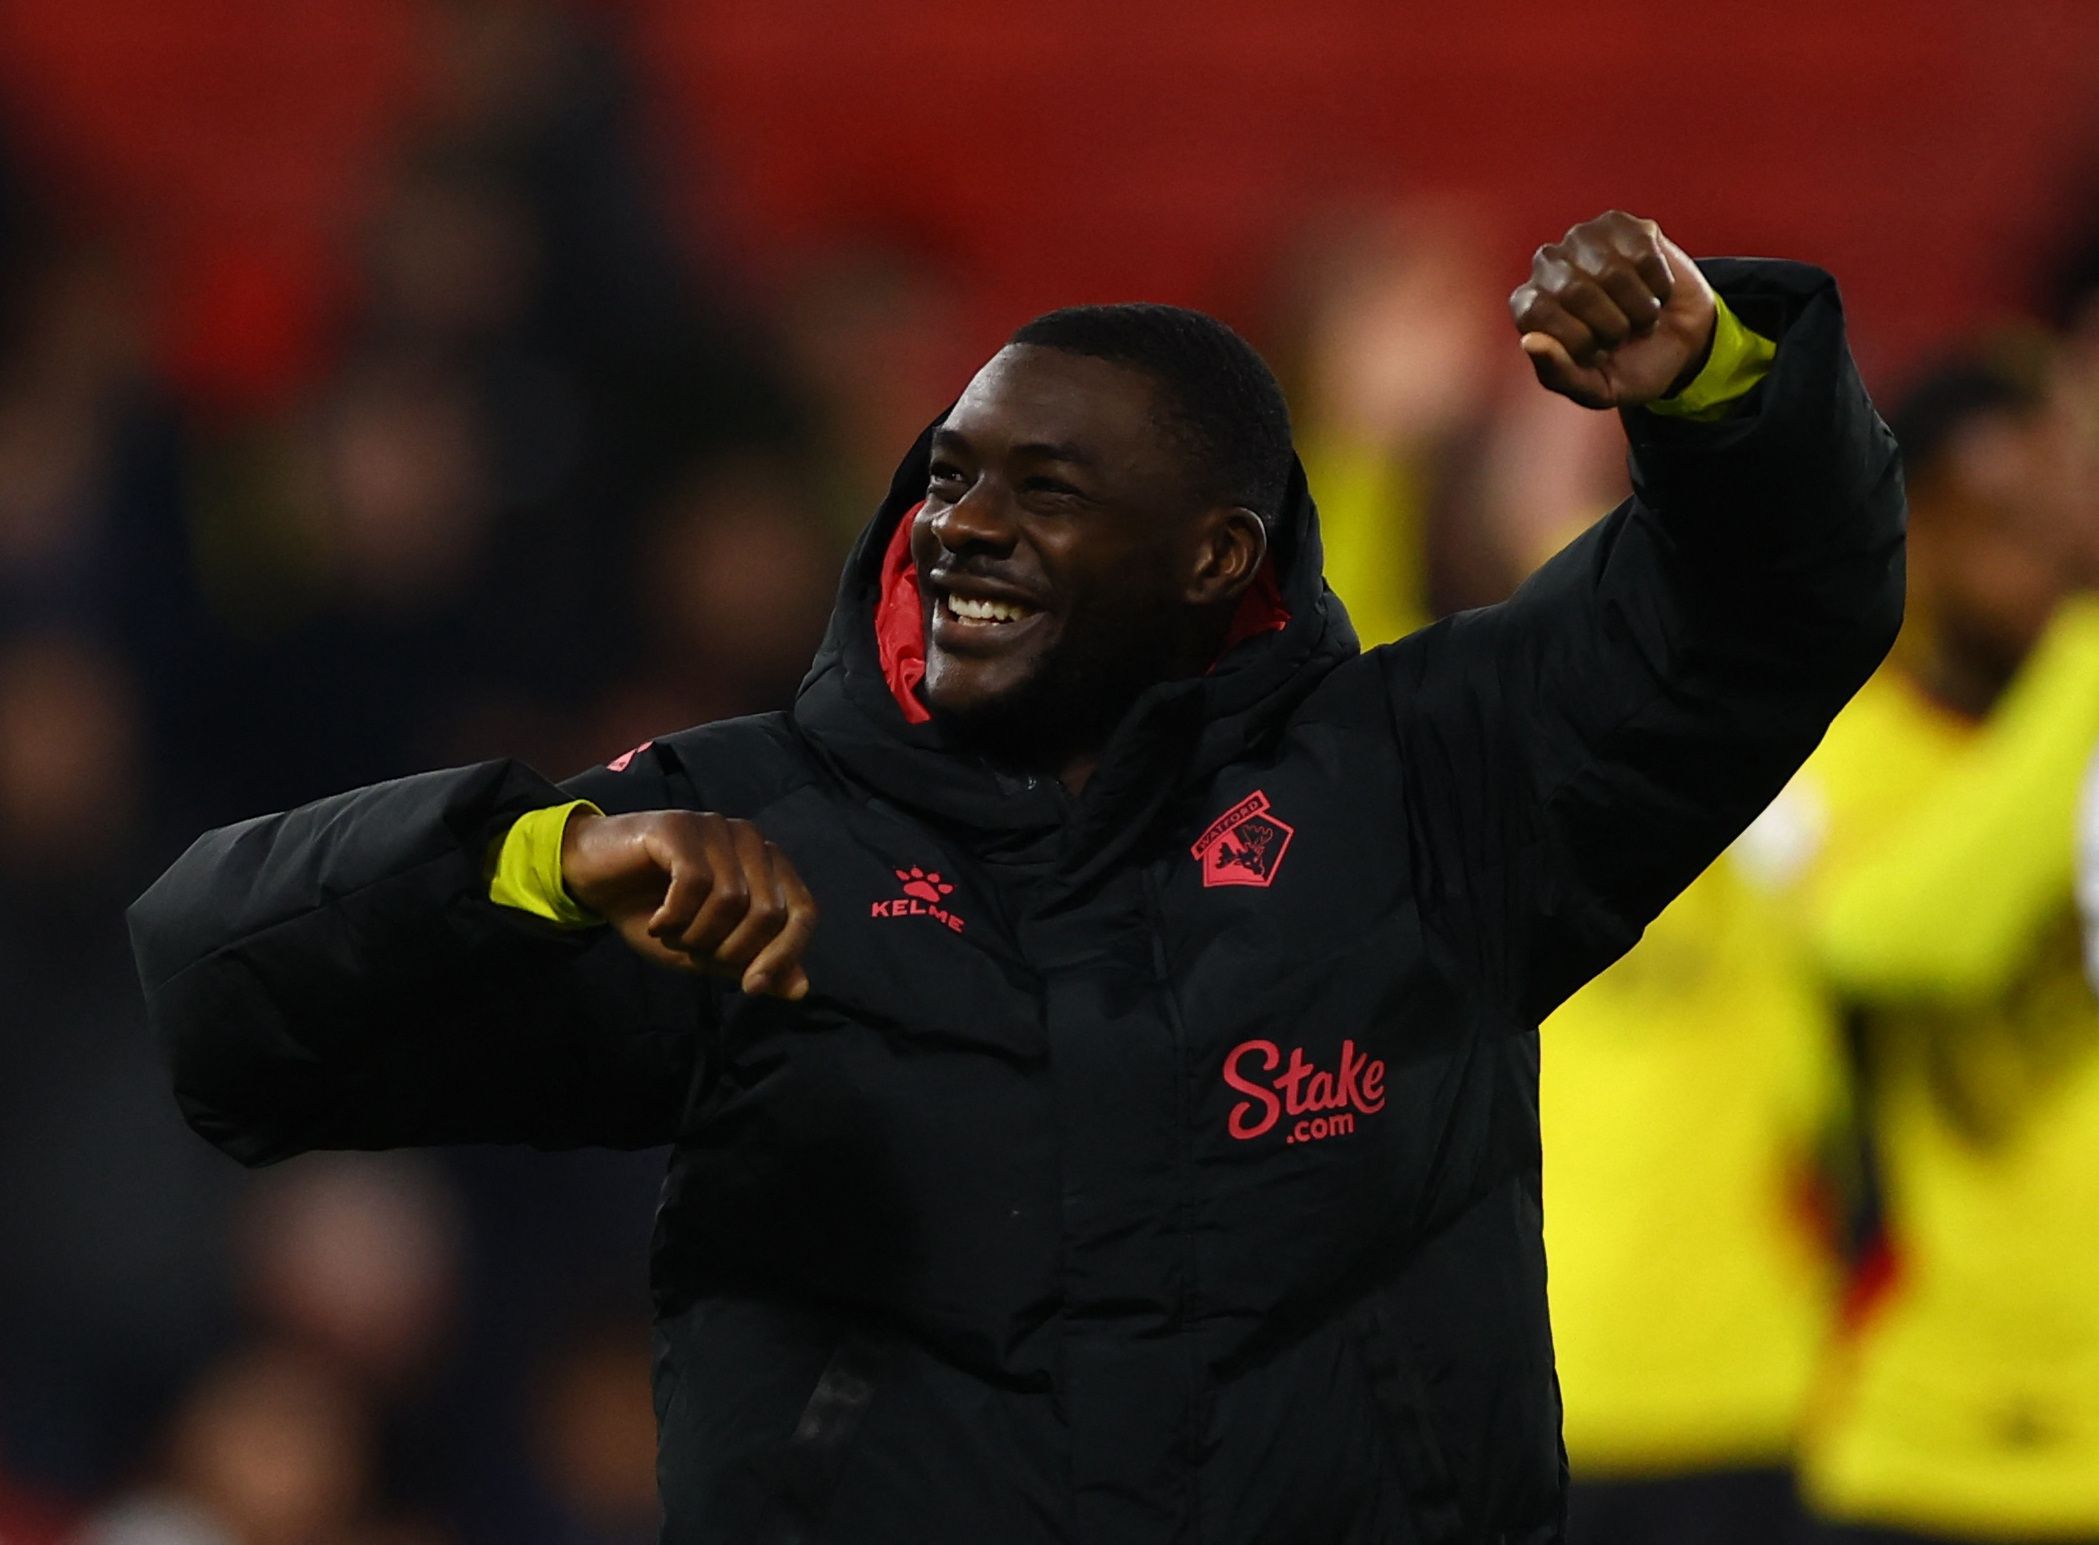 Soccer Football - Championship - Watford v West Bromwich Albion - Vicarage Road, Watford, Britain - February 20, 2023 Watford's Ken Sema celebrates after the match Action Images/Matthew Childs EDITORIAL USE ONLY. No use with unauthorized audio, video, data, fixture lists, club/league logos or 'live' services. Online in-match use limited to 75 images, no video emulation. No use in betting, games or single club /league/player publications.  Please contact your account representative for further de